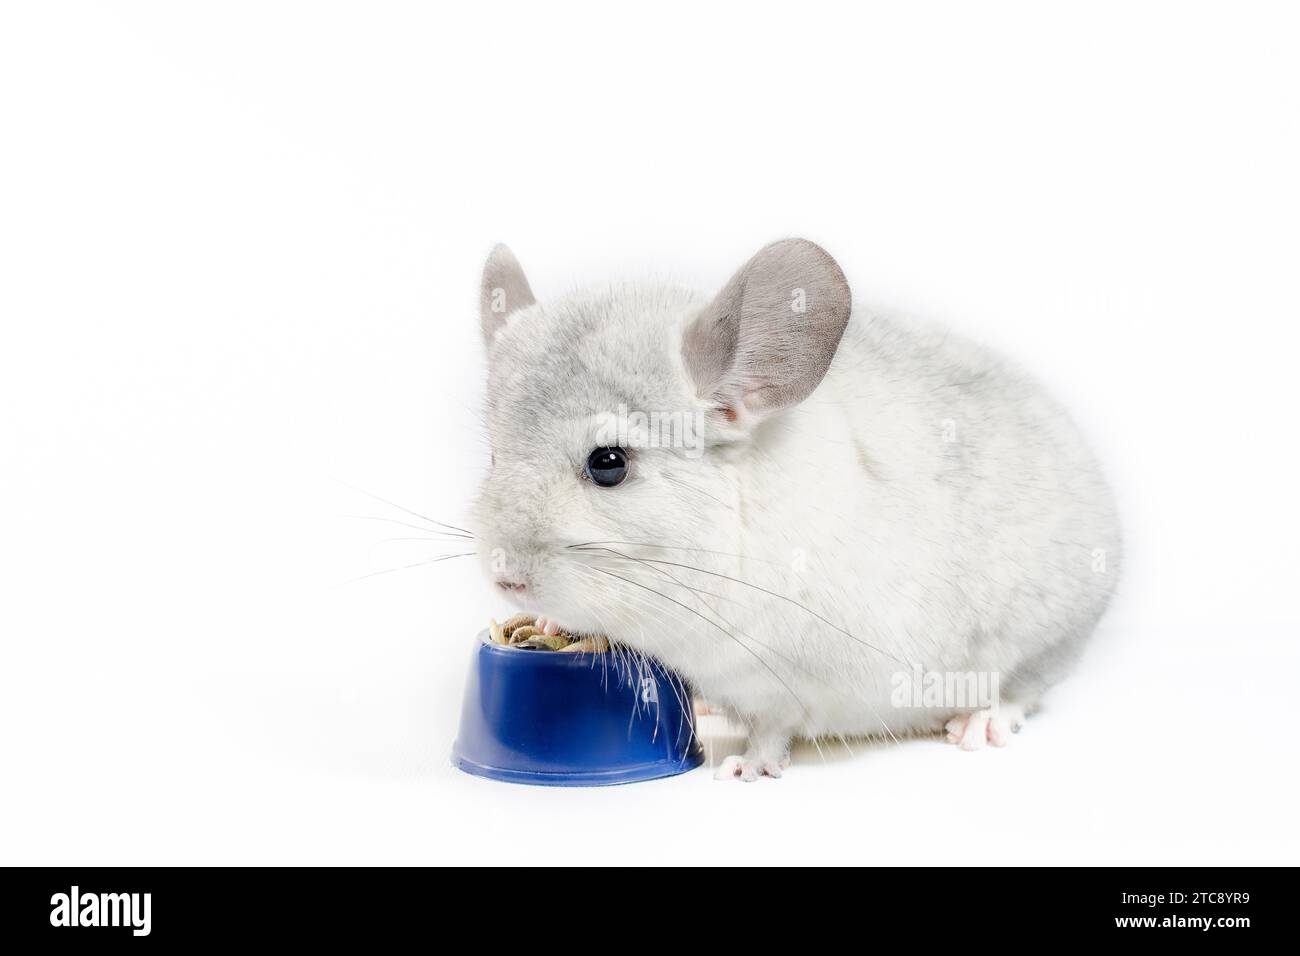 White chinchilla eats its food from a blue bowl on a white background Stock Photo